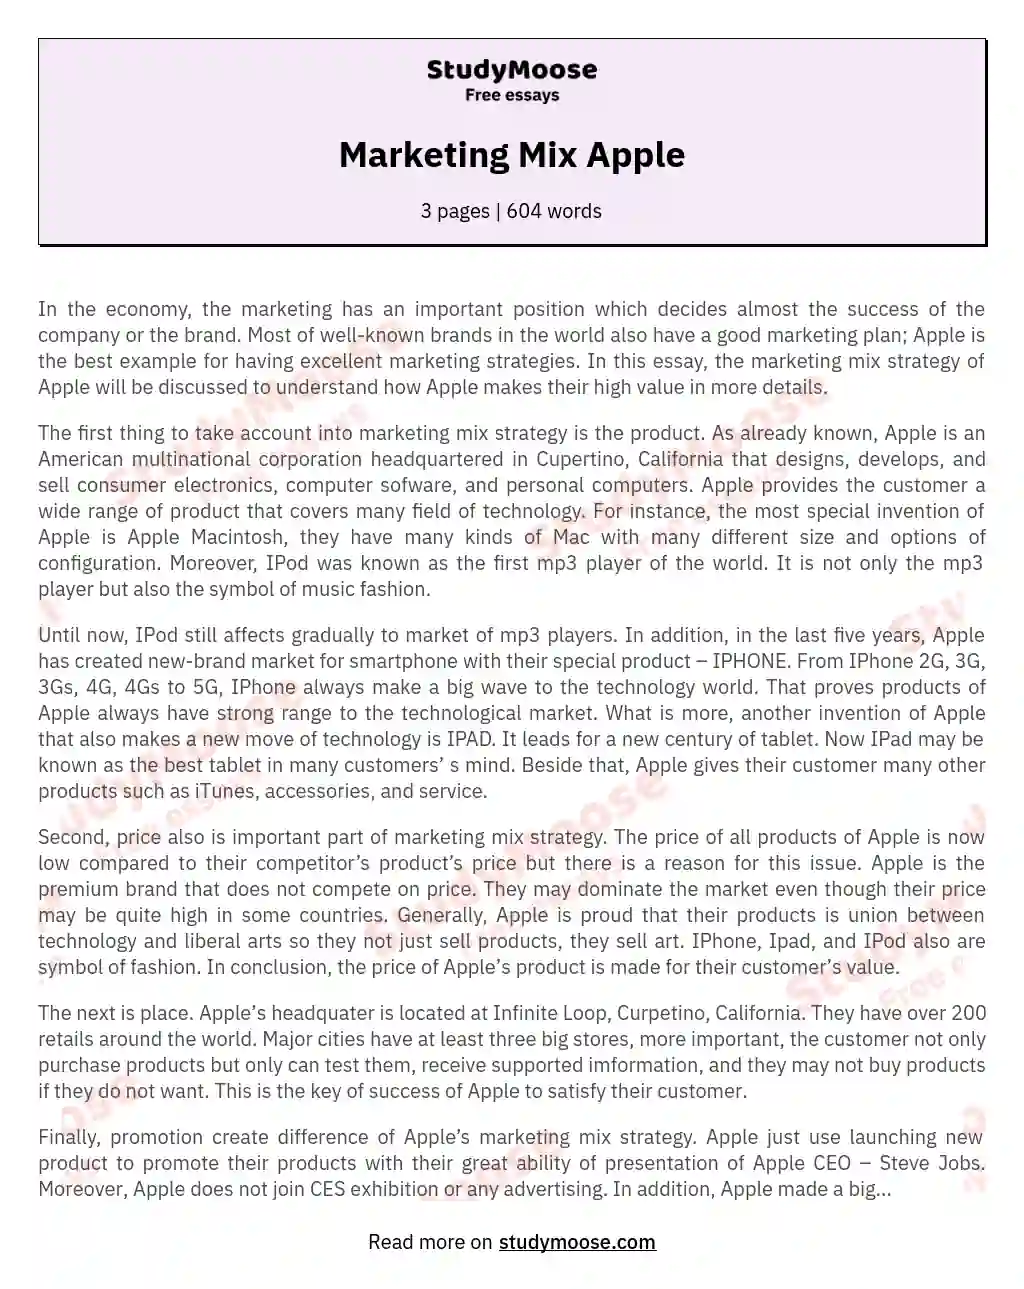 Unveiling Apple's Marketing Mix Strategy essay